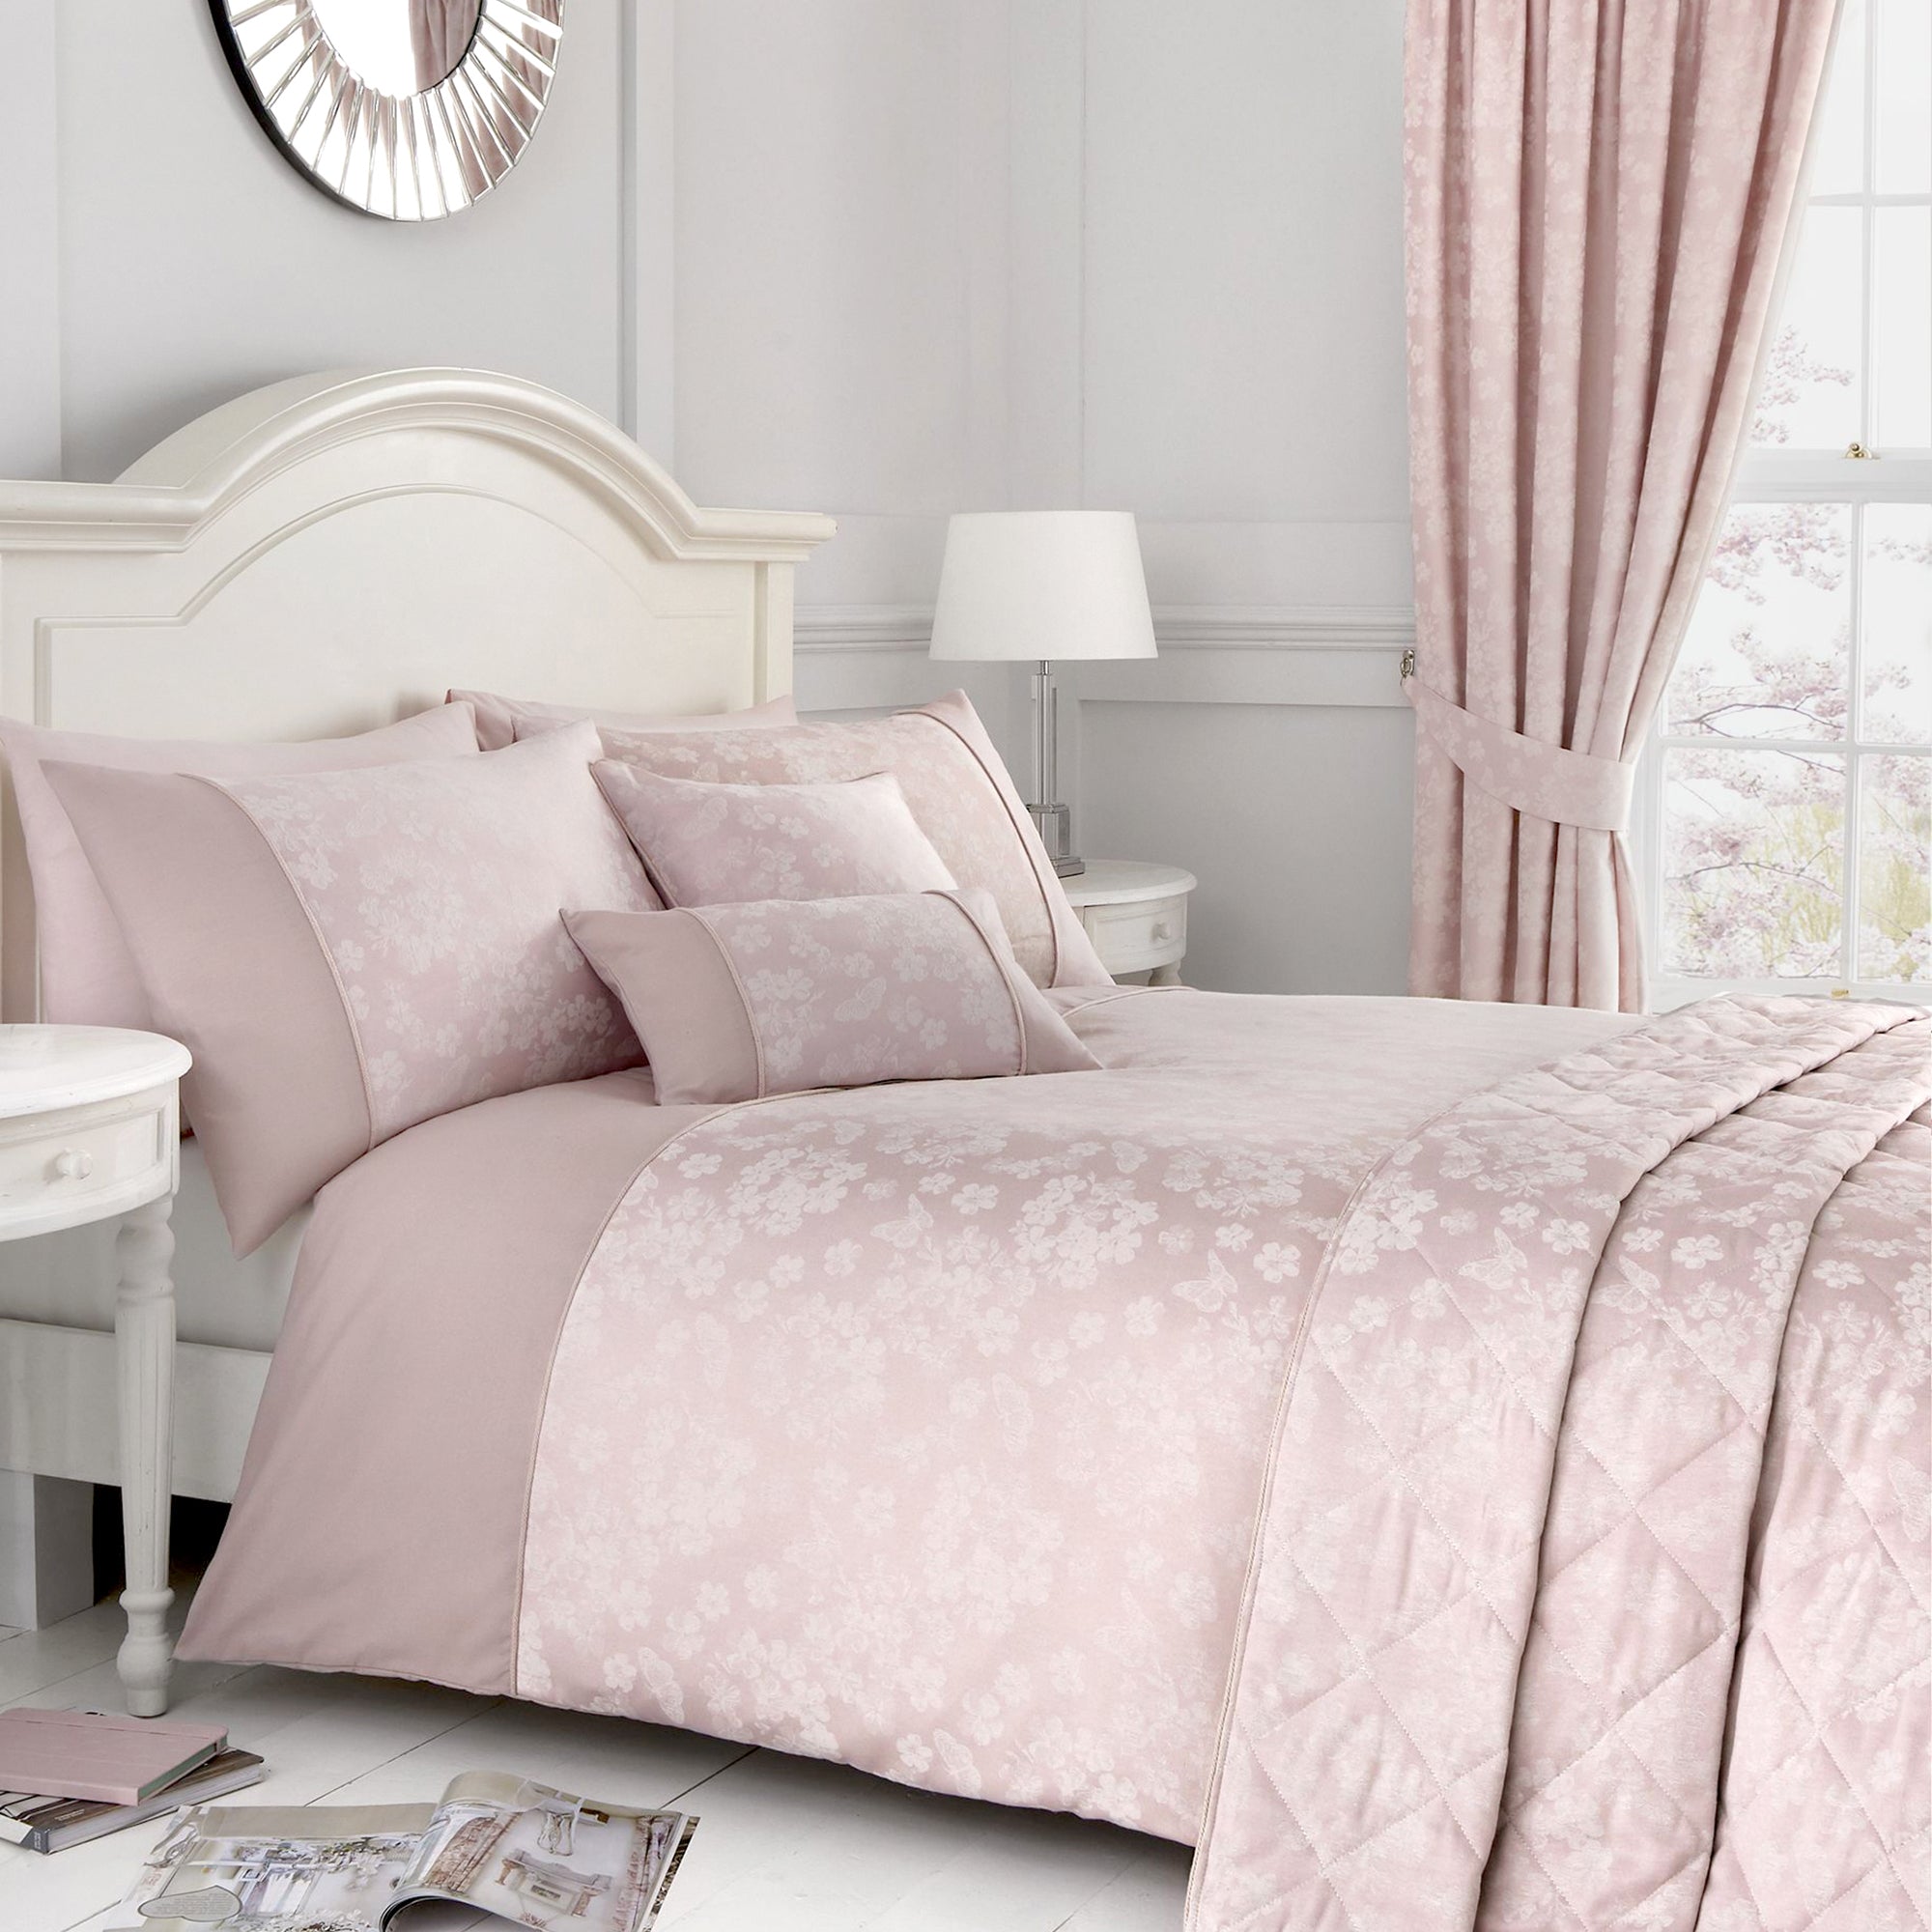 Blossom - Jacquard Bedding Set, Curtains & Cushions in Blush - by D&D Woven